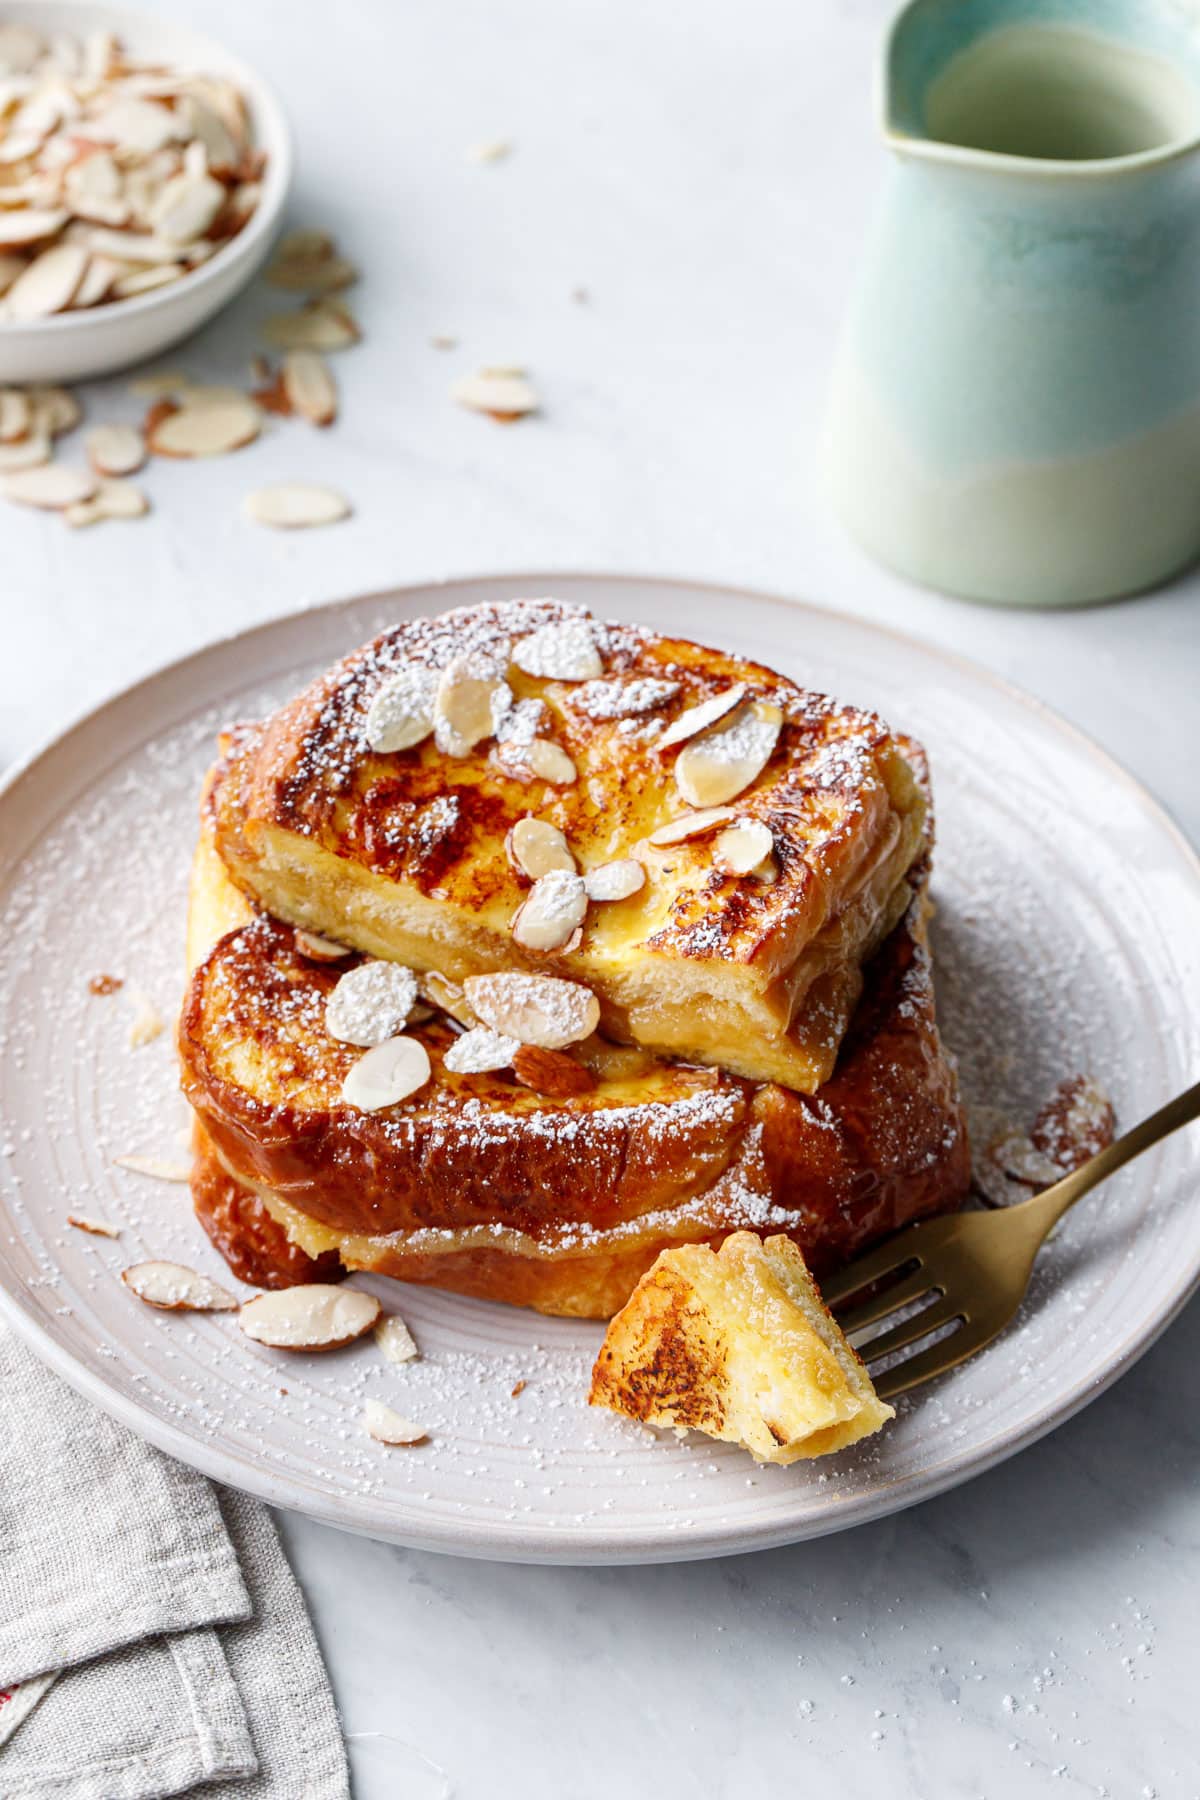 Plate with Marzipan-Stuffed French Toast, bite on a gold fork that shows the texture of the gooey filling inside.